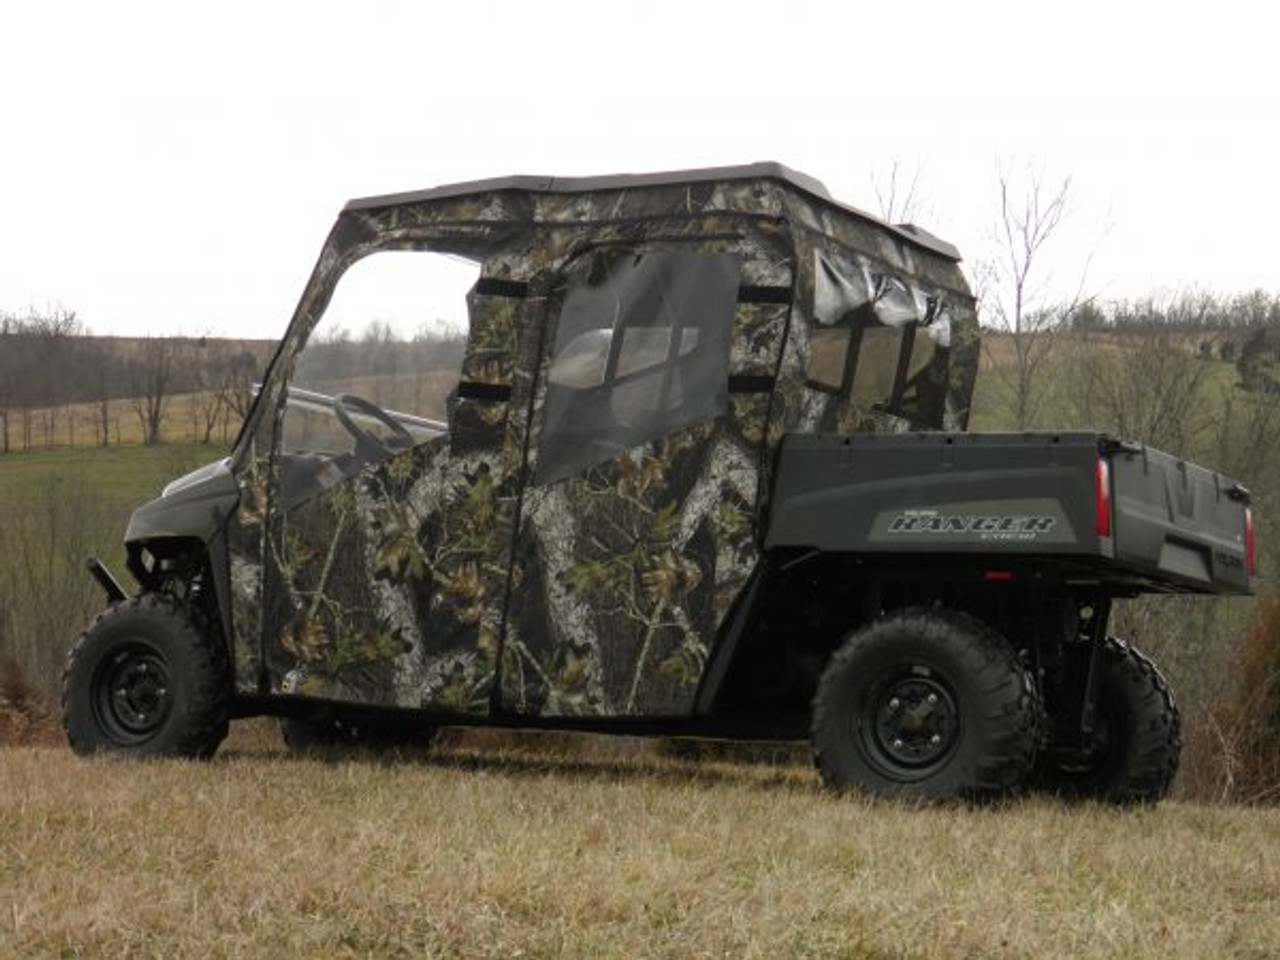 3 Star side x side Polaris Ranger Mid-Size Crew 500/570 full cab enclosure side view